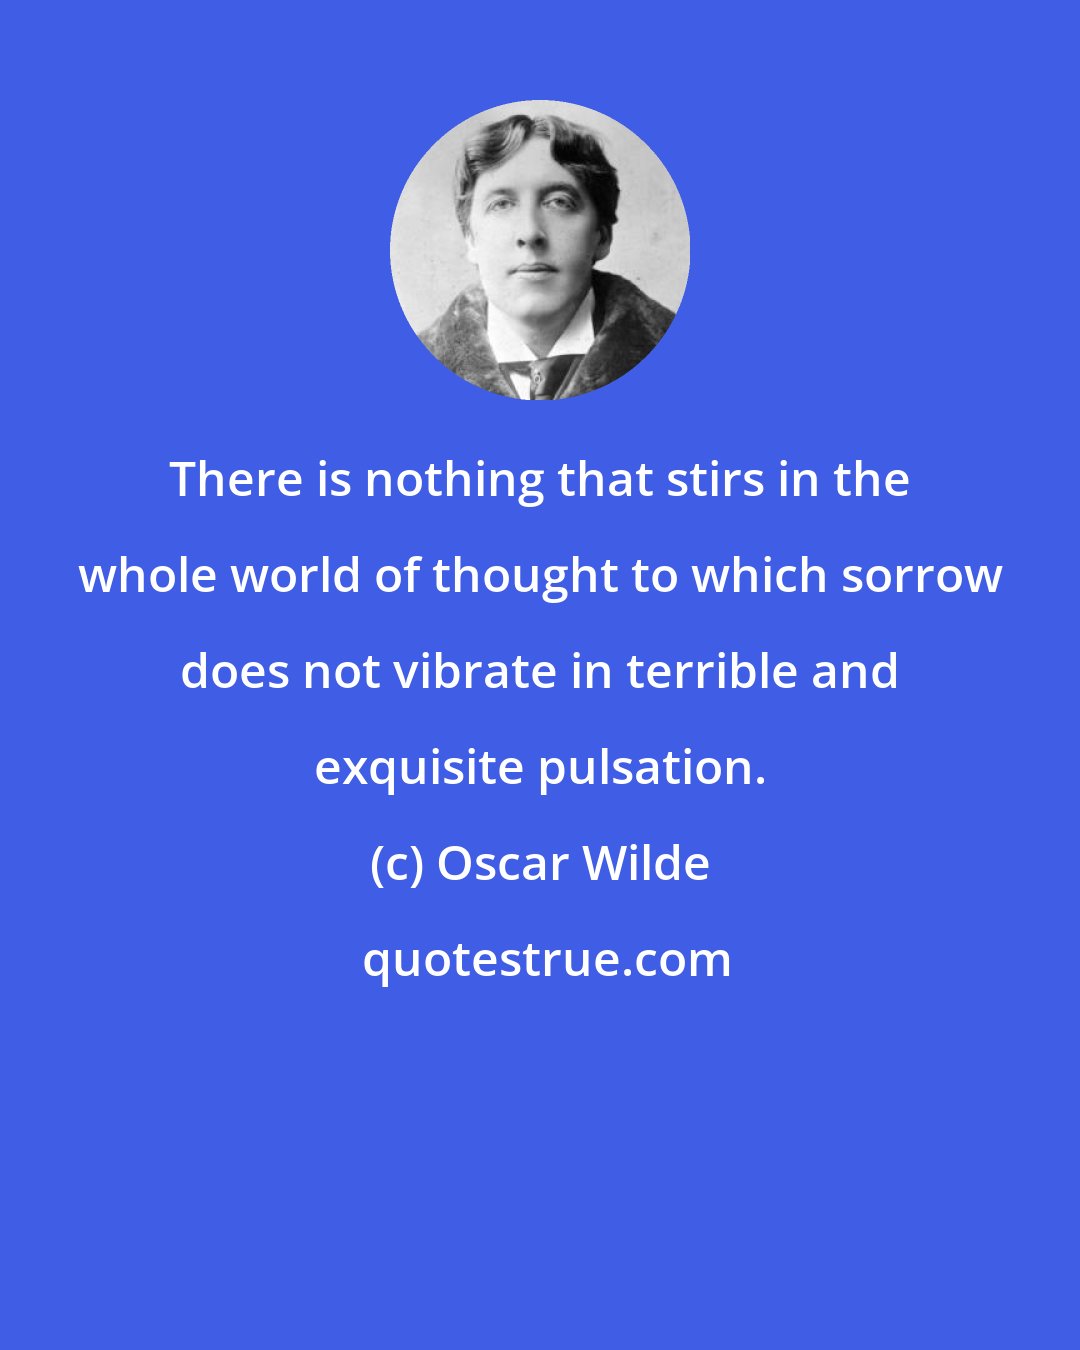 Oscar Wilde: There is nothing that stirs in the whole world of thought to which sorrow does not vibrate in terrible and exquisite pulsation.